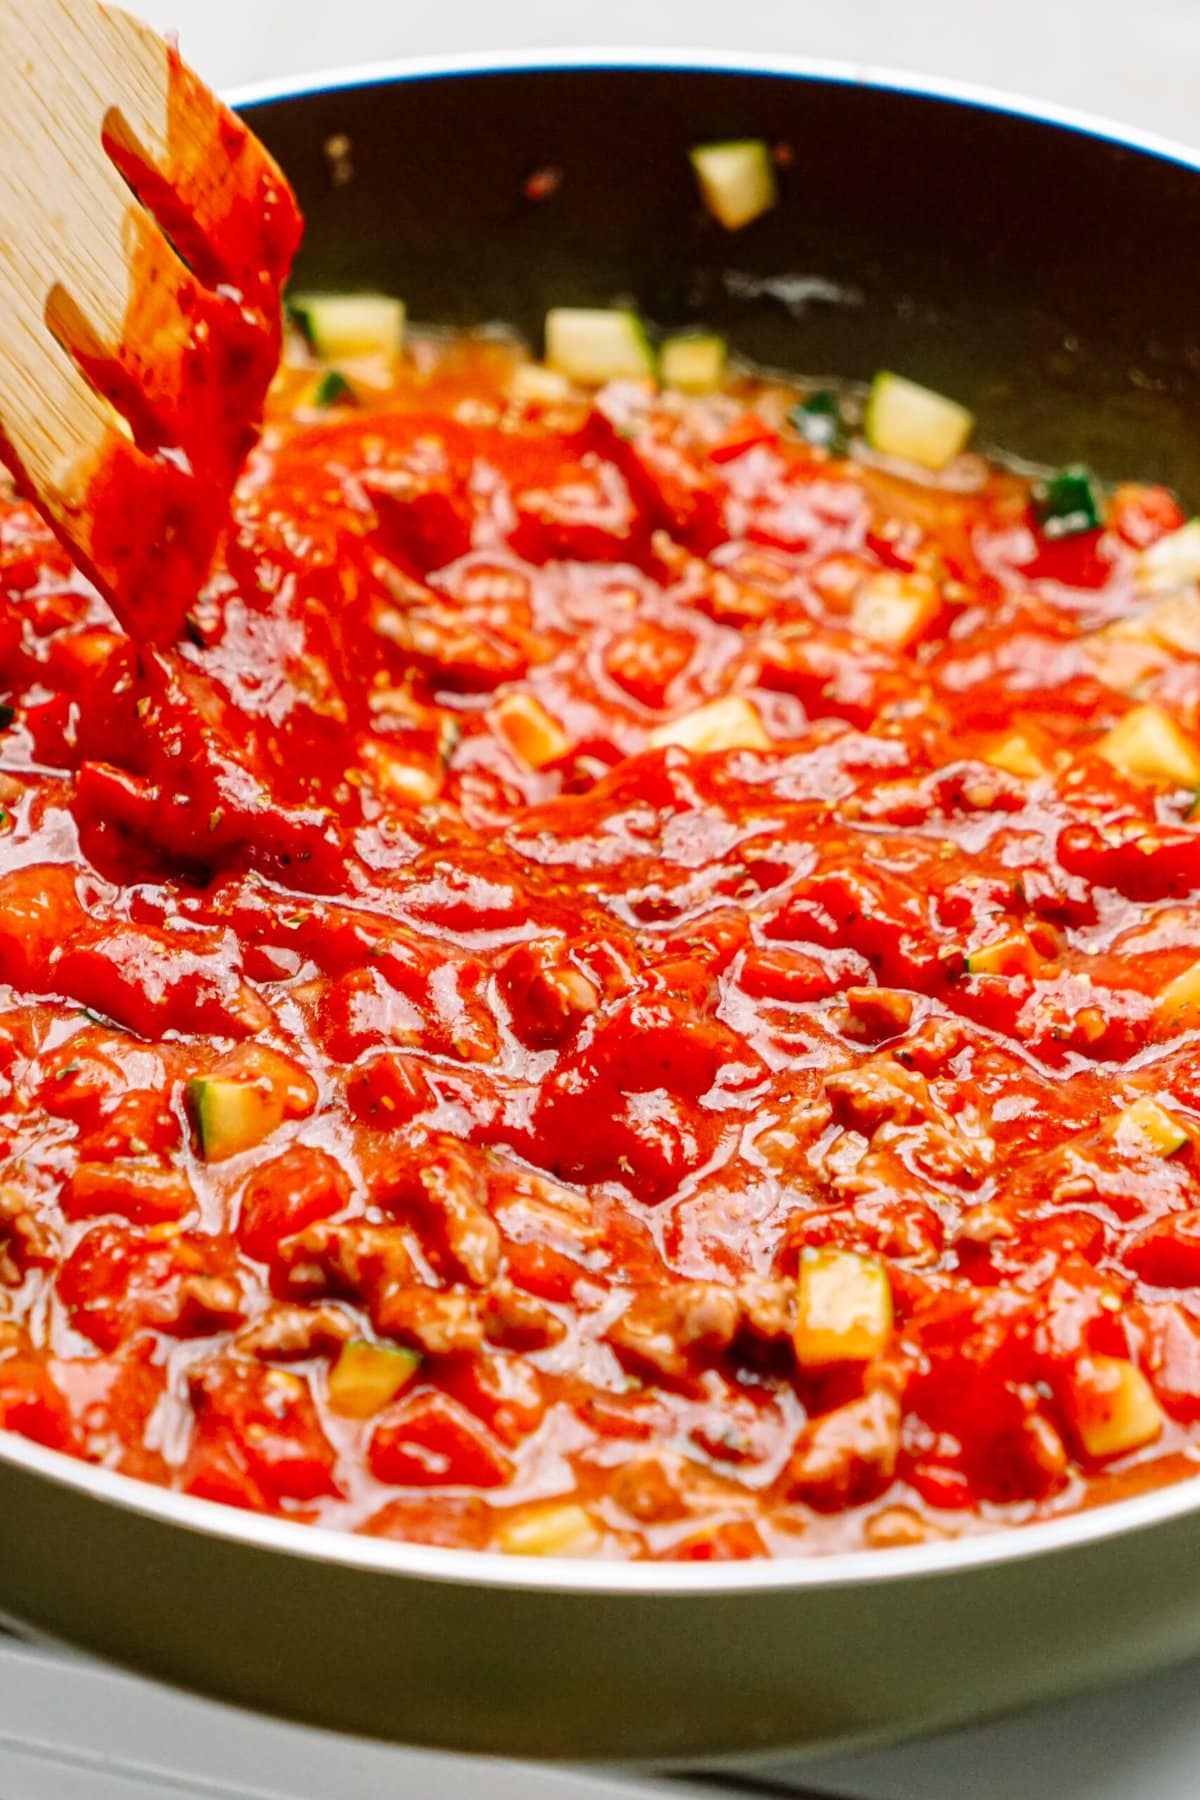 A pan filled with a chunky tomato-based sauce being stirred with a wooden spatula.